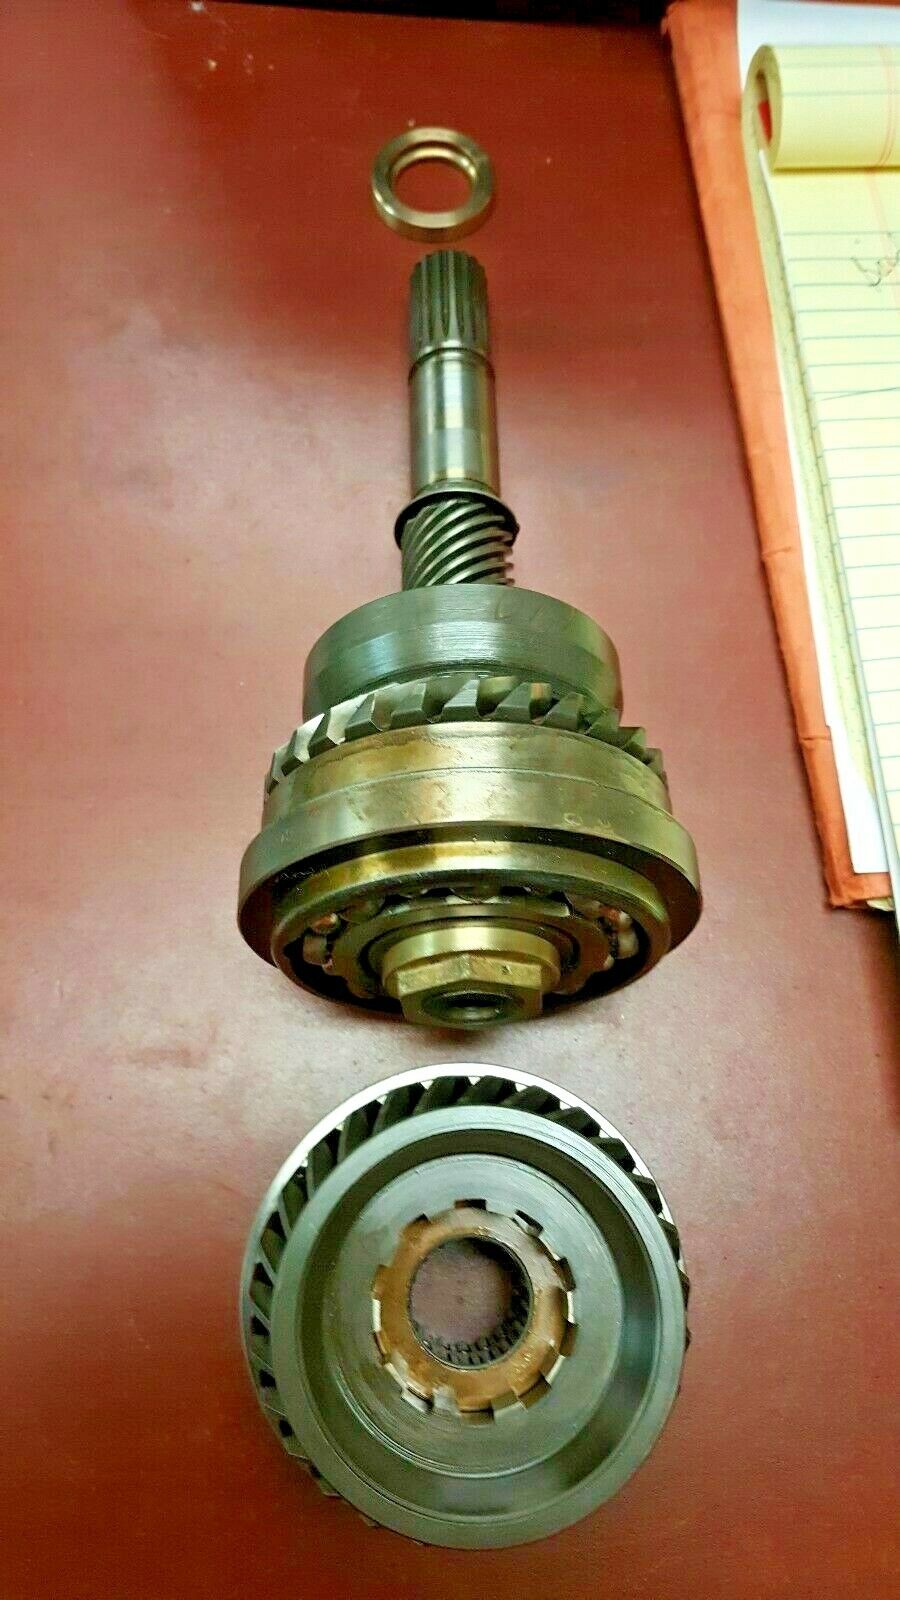 VOLVO PENTA GEAR SET #897309 WITH SHAFT ASSEMBLY  USED